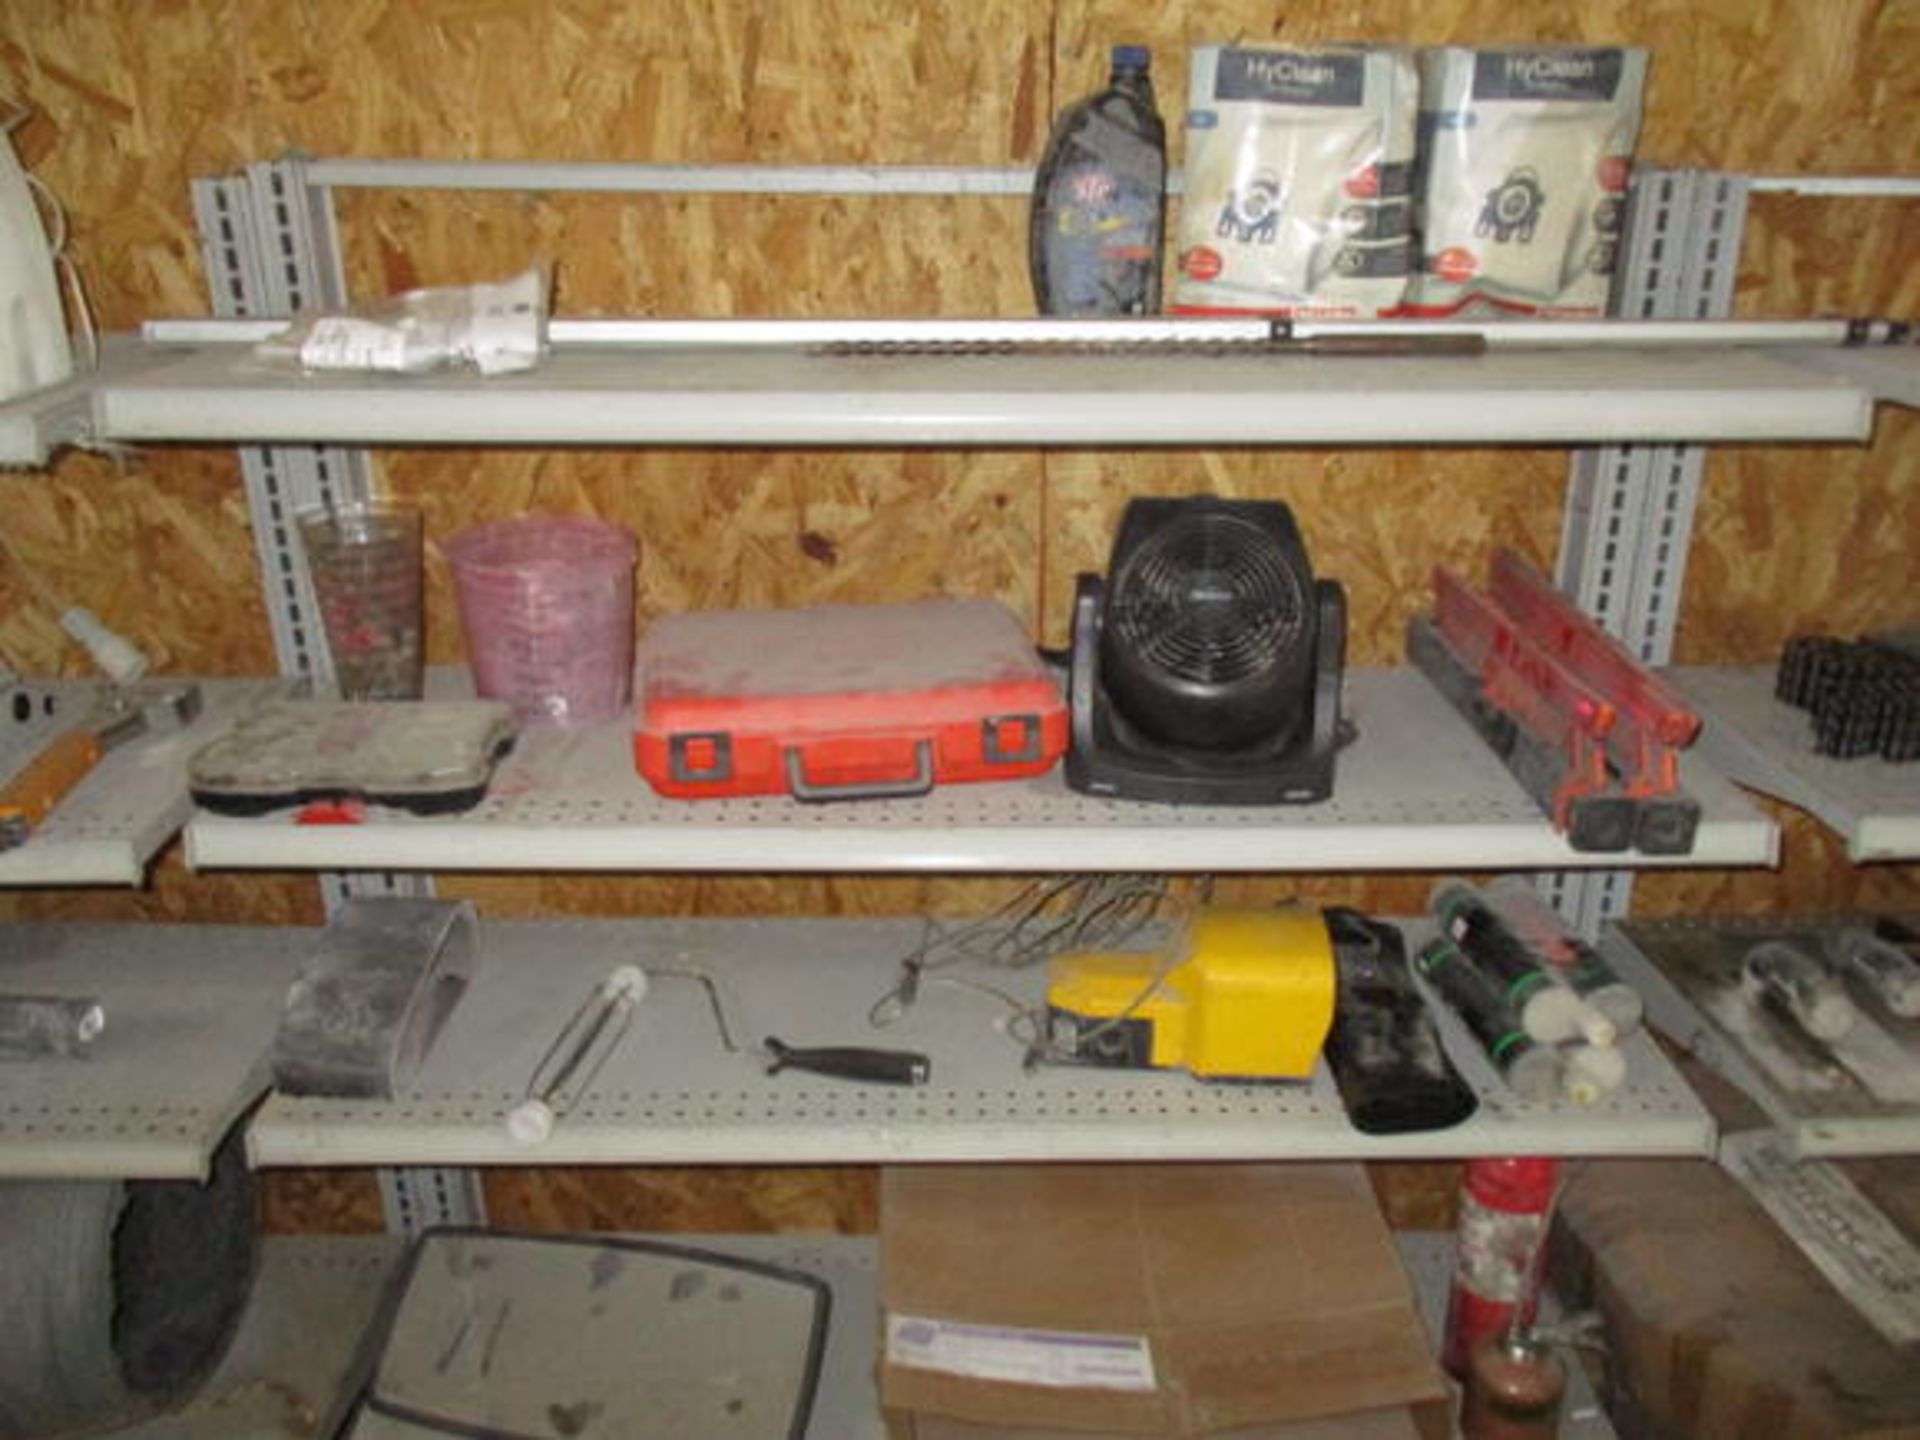 ASSORT TOOLS, PARTS W/ SHELVES IN (3) AREAS ALONG WALL - Image 3 of 10